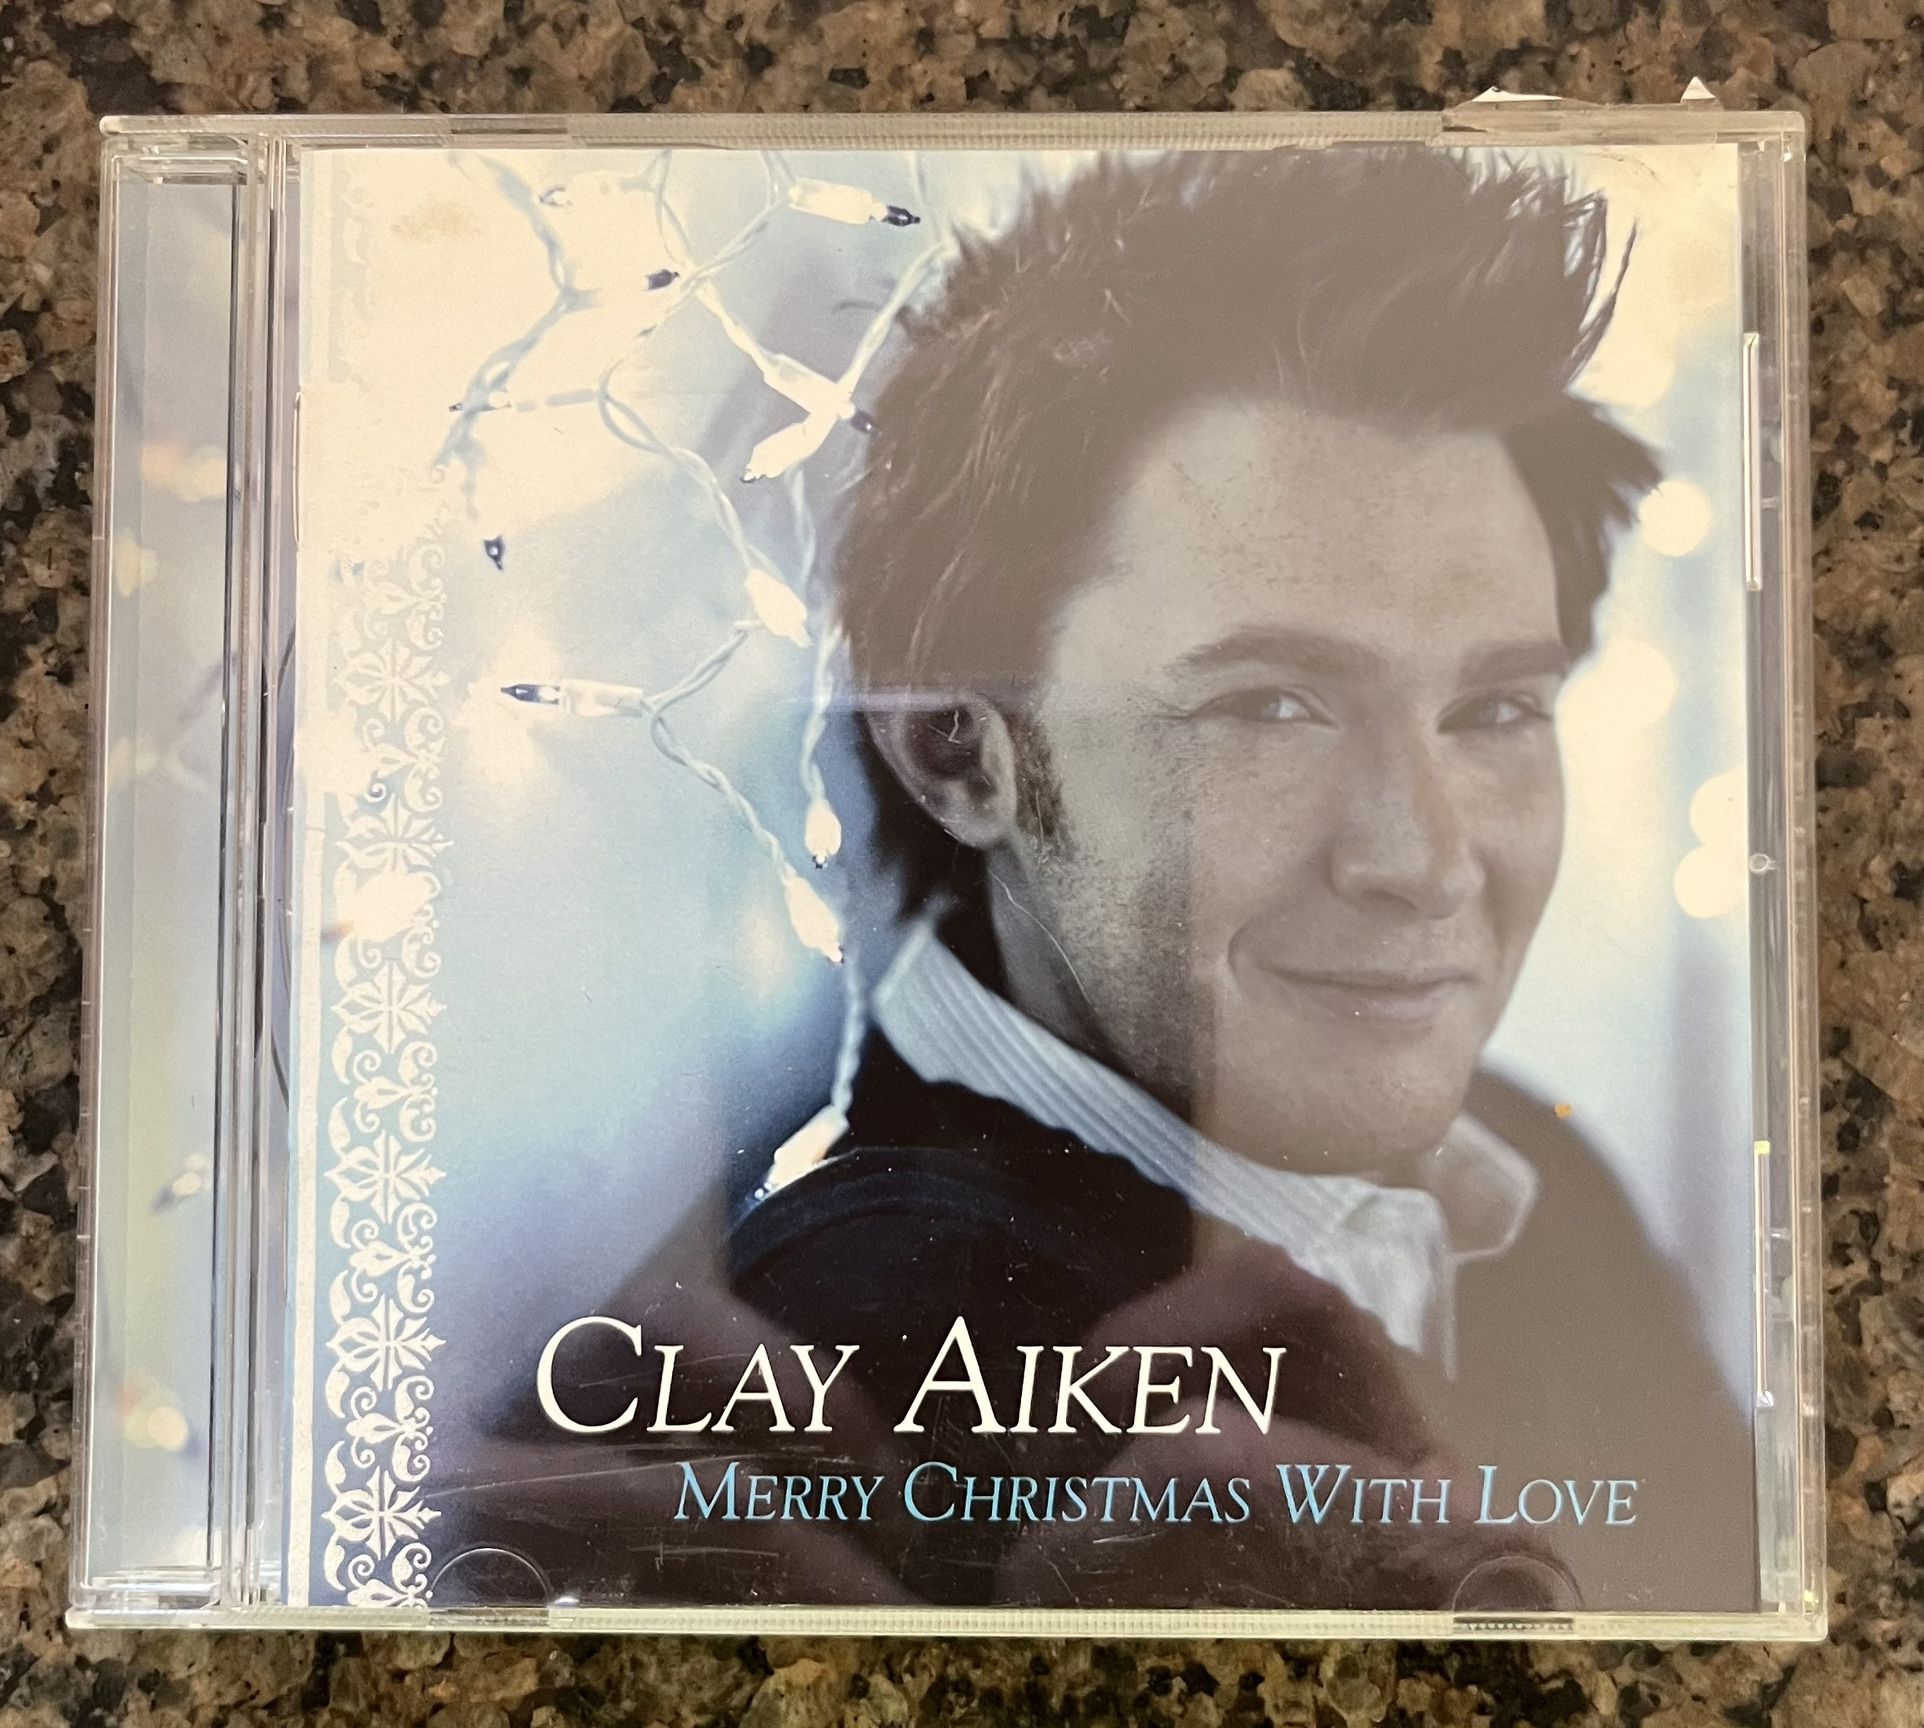 Merry Christmas with Love by Clay Aiken CD 2004 RCA B2